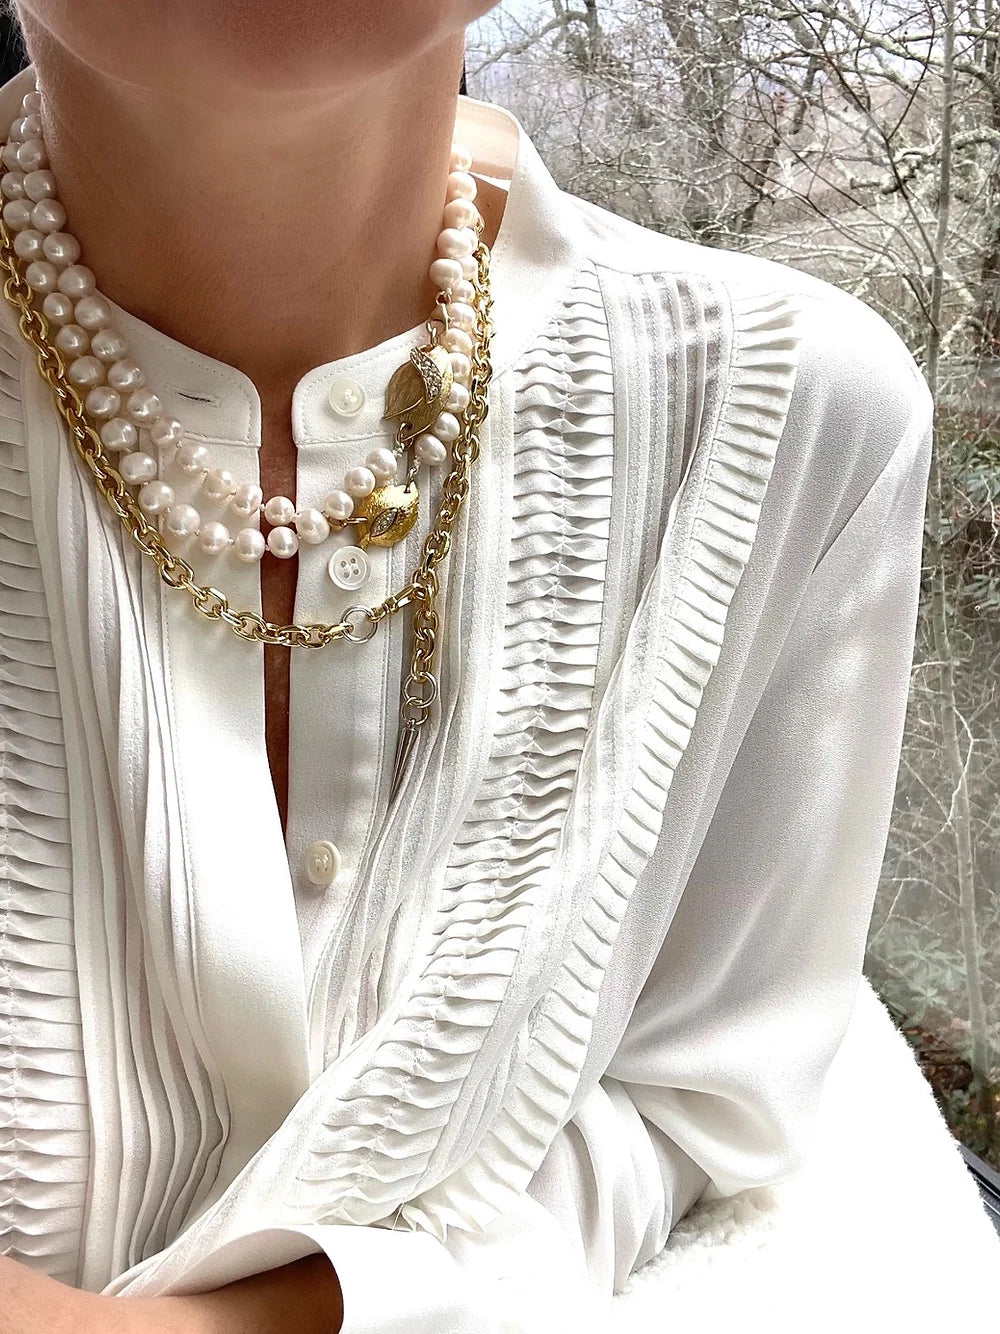 ONE OF A KIND CREAM BAROQUE PEARLS WITH VINTAGE EMBELLISHMENTS NECKLACE - JENN FENTON